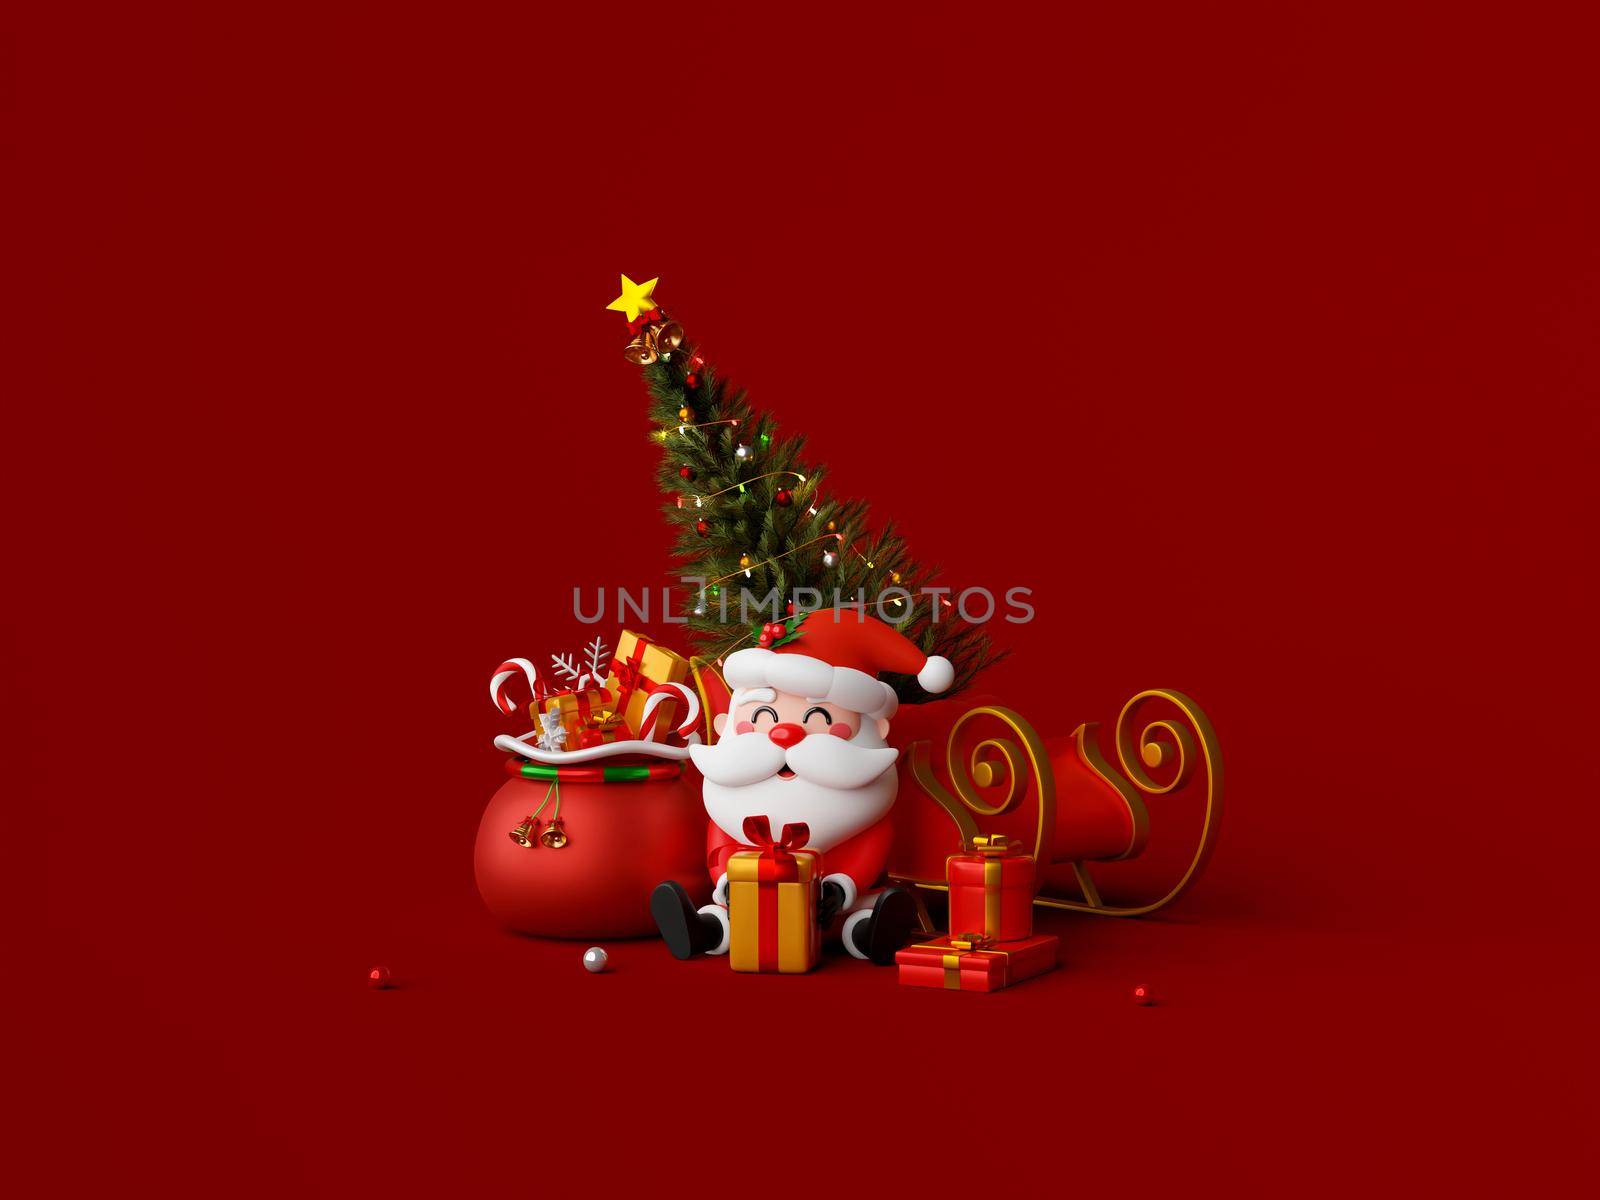 3d illustration of Santa Claus with sleigh and gift bag on red background by nutzchotwarut